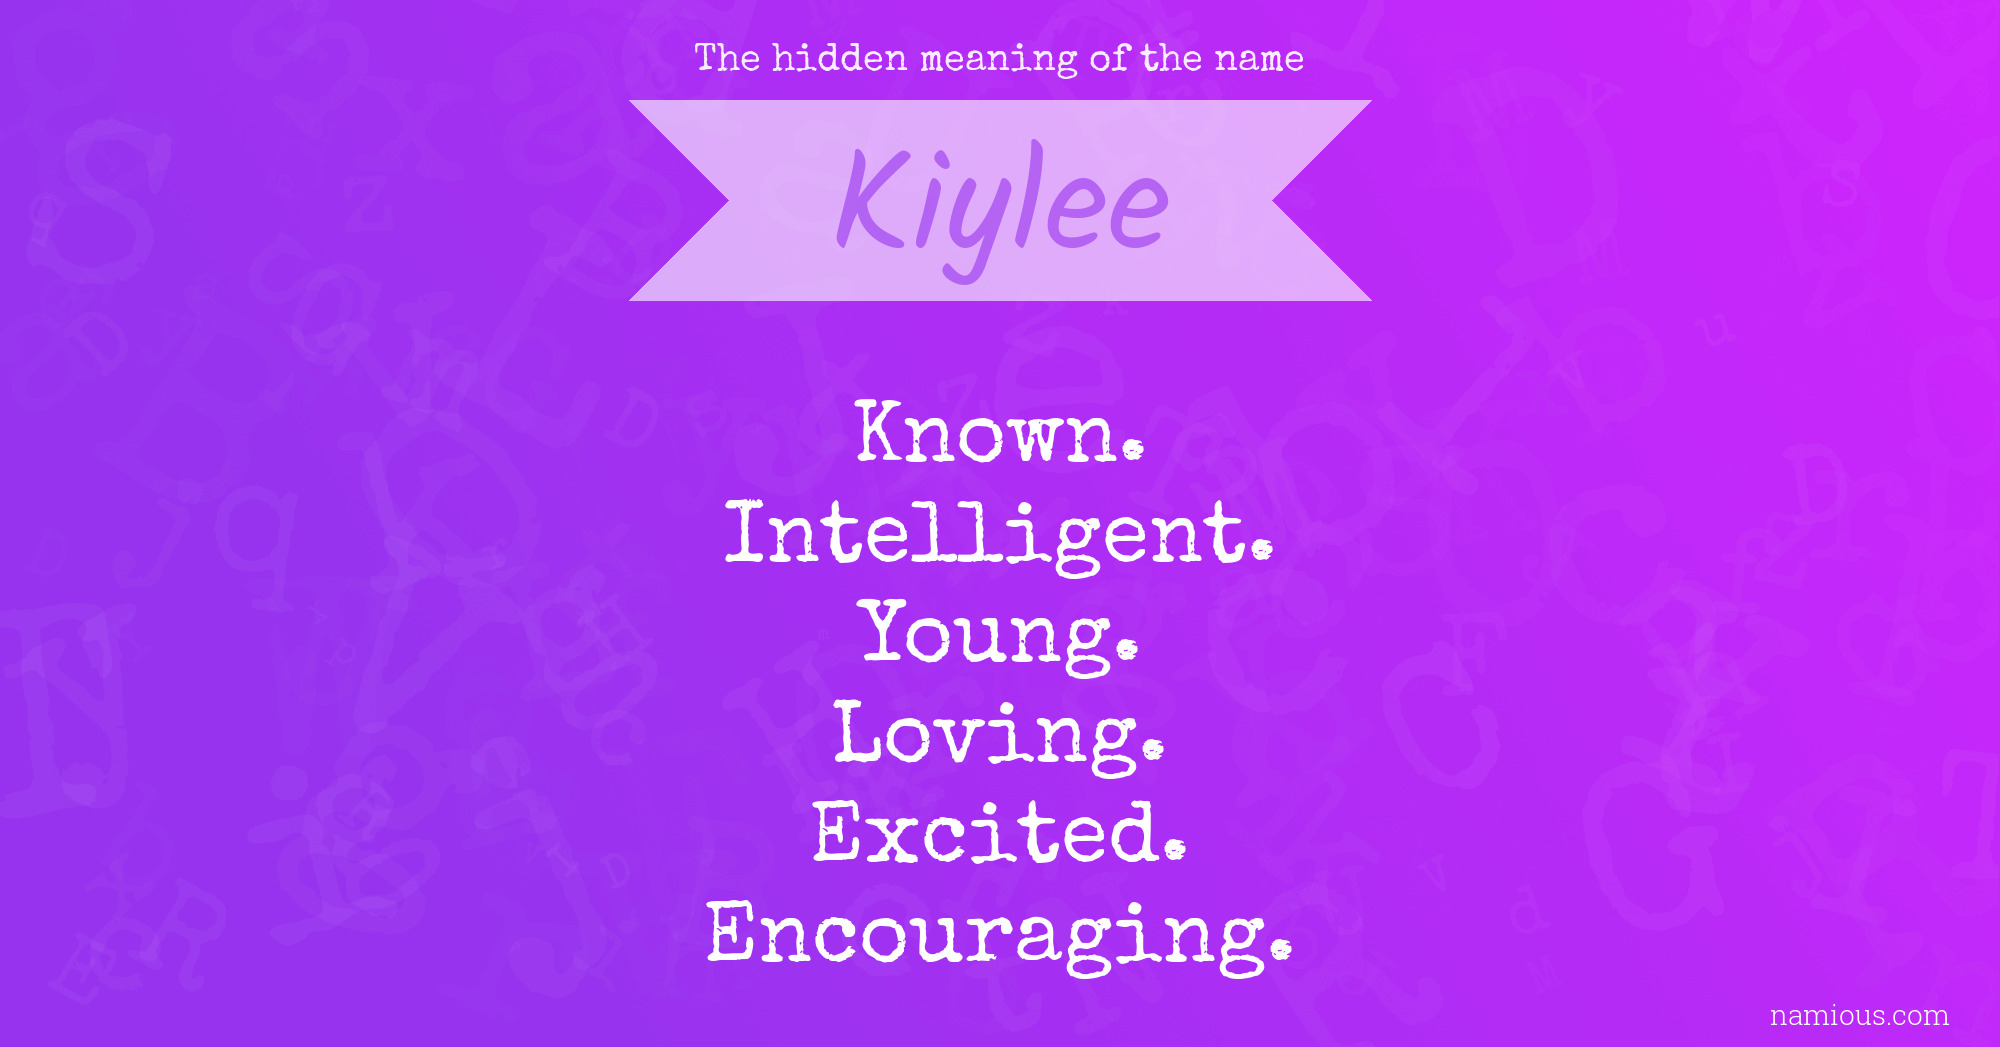 The hidden meaning of the name Kiylee